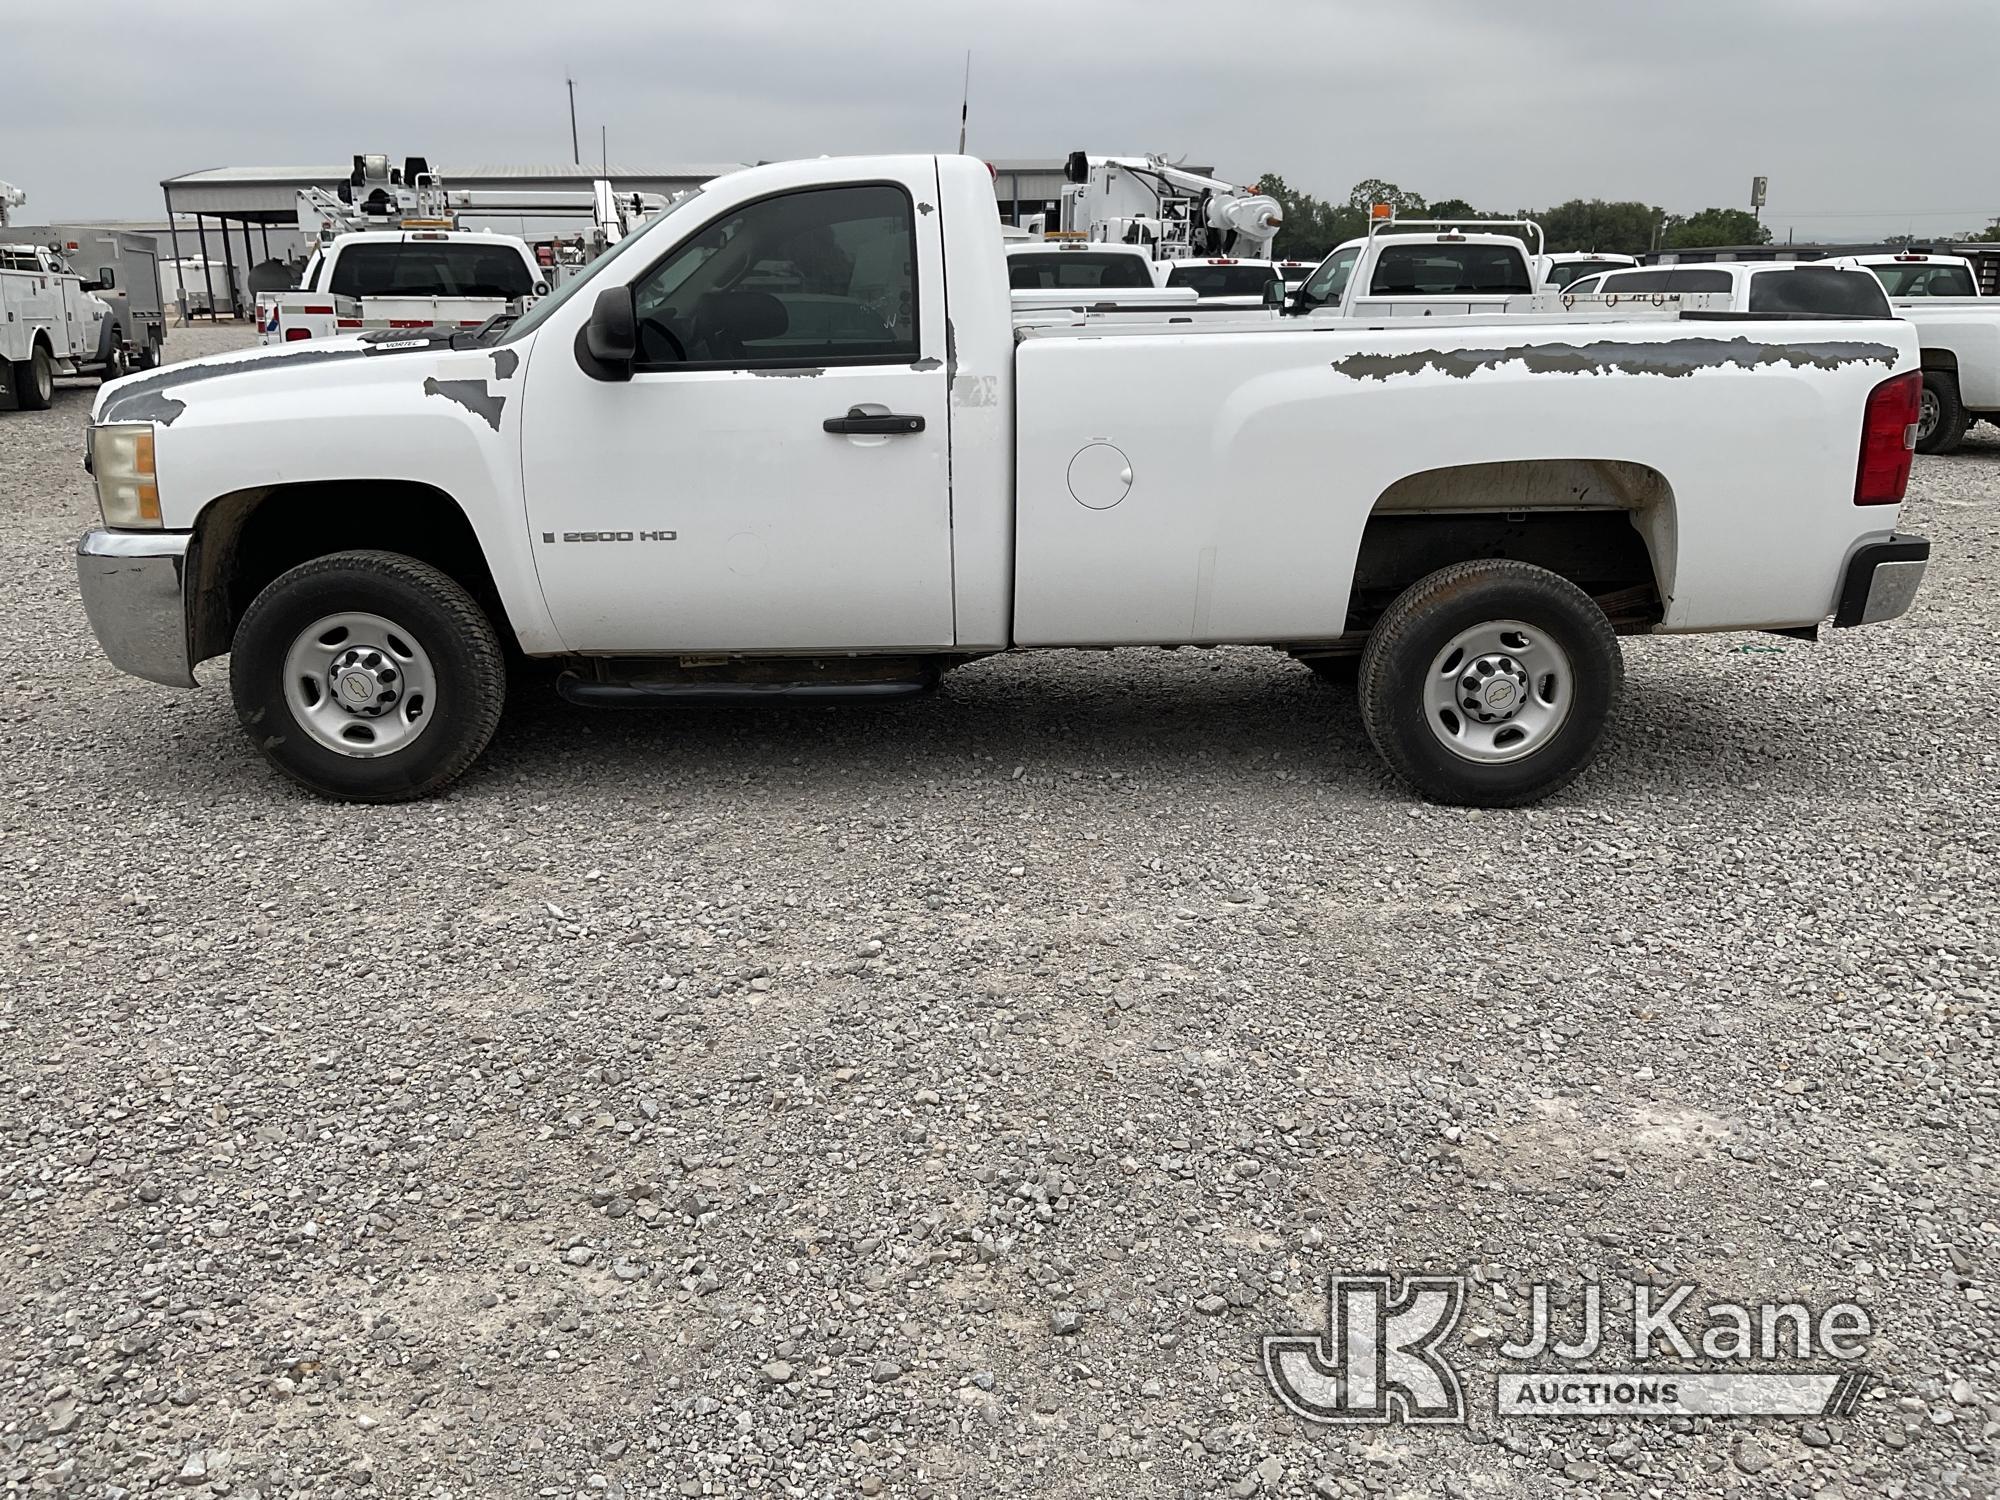 (Johnson City, TX) 2009 Chevrolet Silverado 2500HD Pickup Truck, , Cooperative owned and maintained